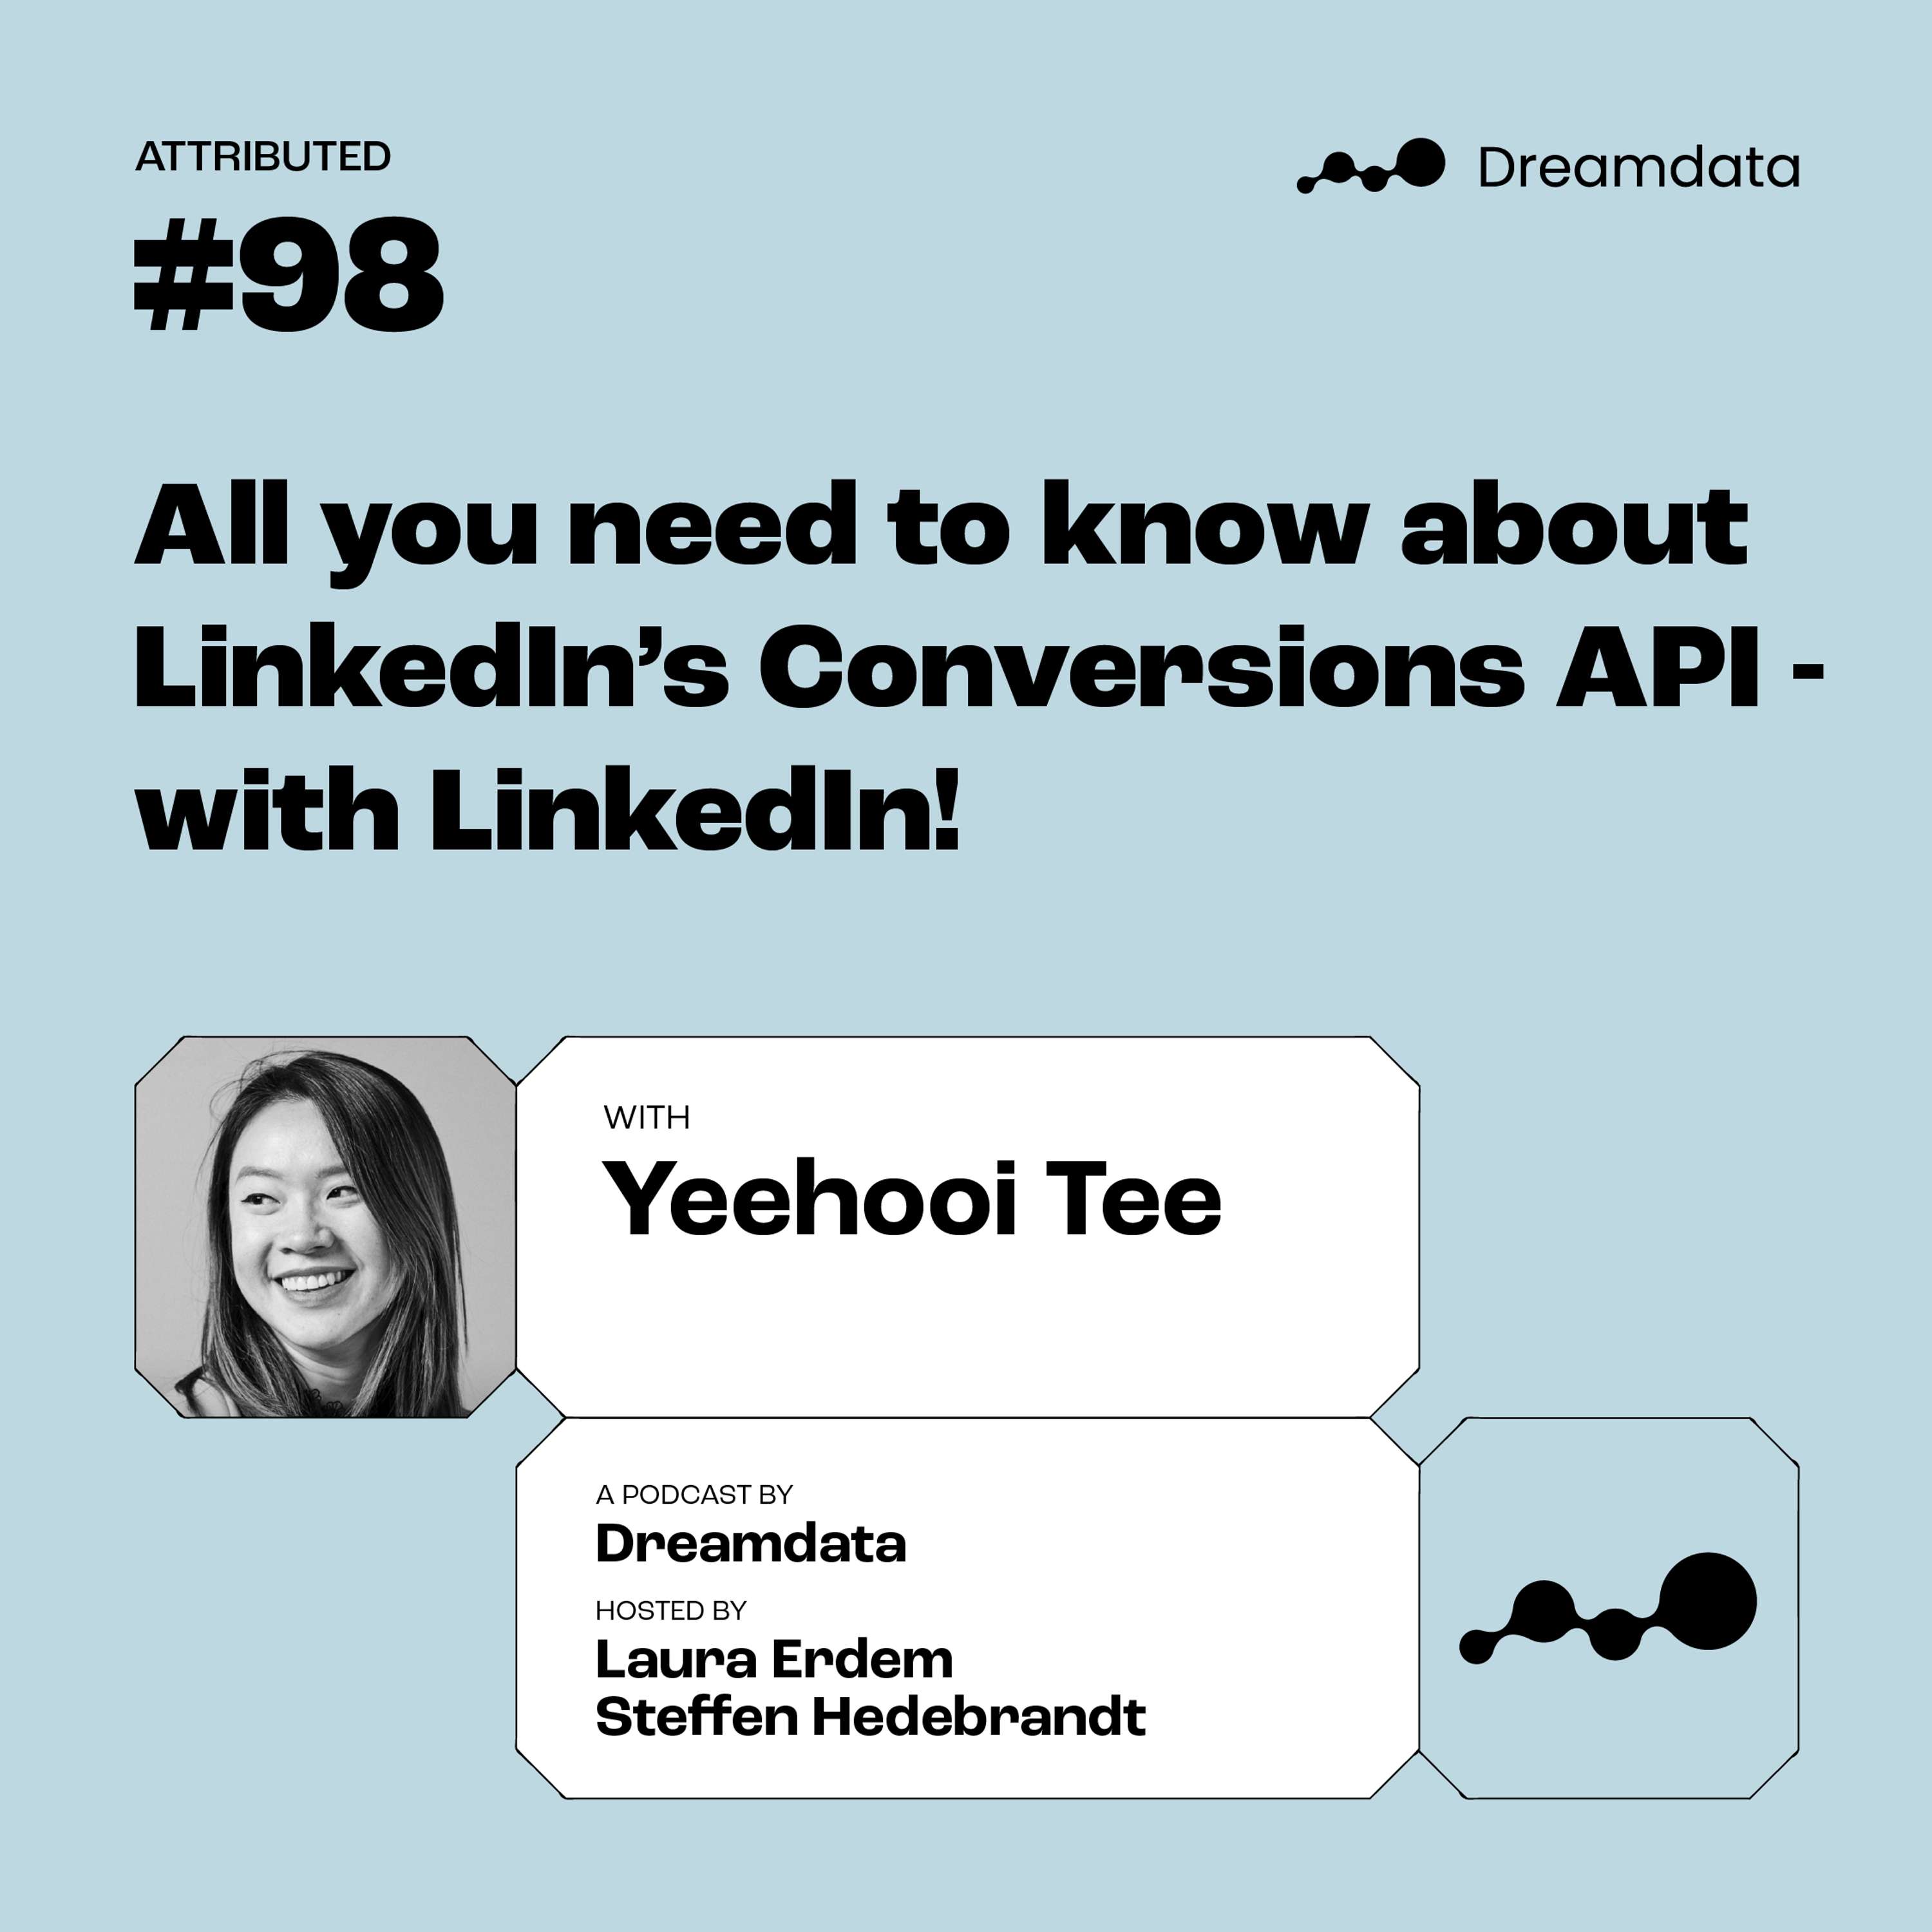 All you need to know about LinkedIn’s Conversions API - with LinkedIn!